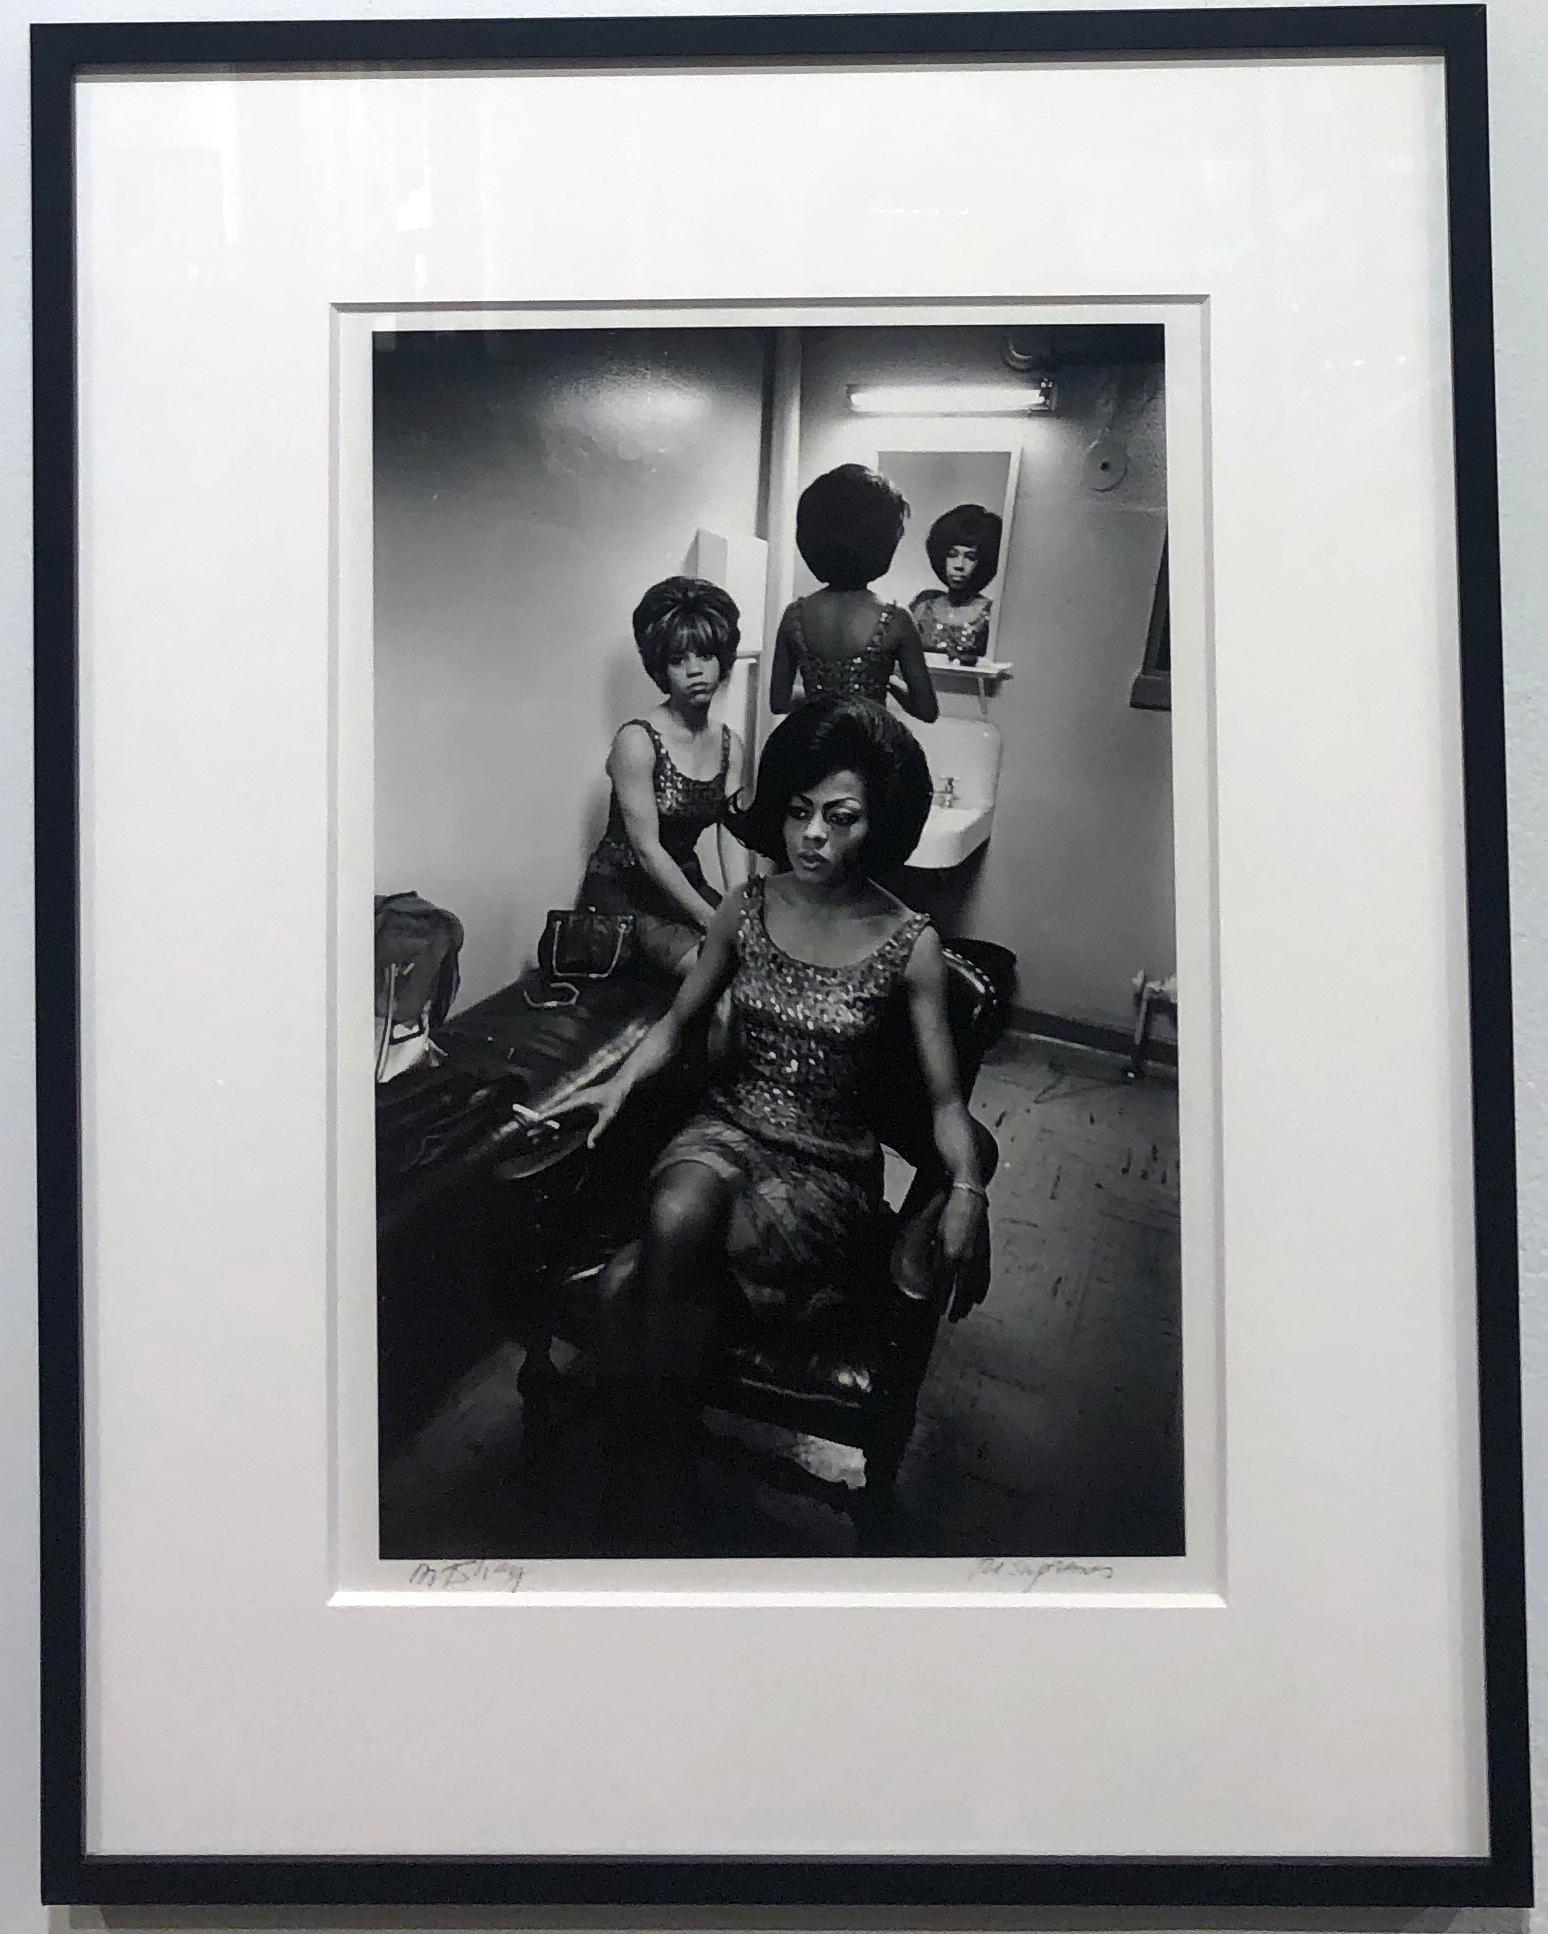 Diana Ross & The Supremes, Supremely Tired, Detroit 1965, Black and White Photo - Photograph by Art Shay